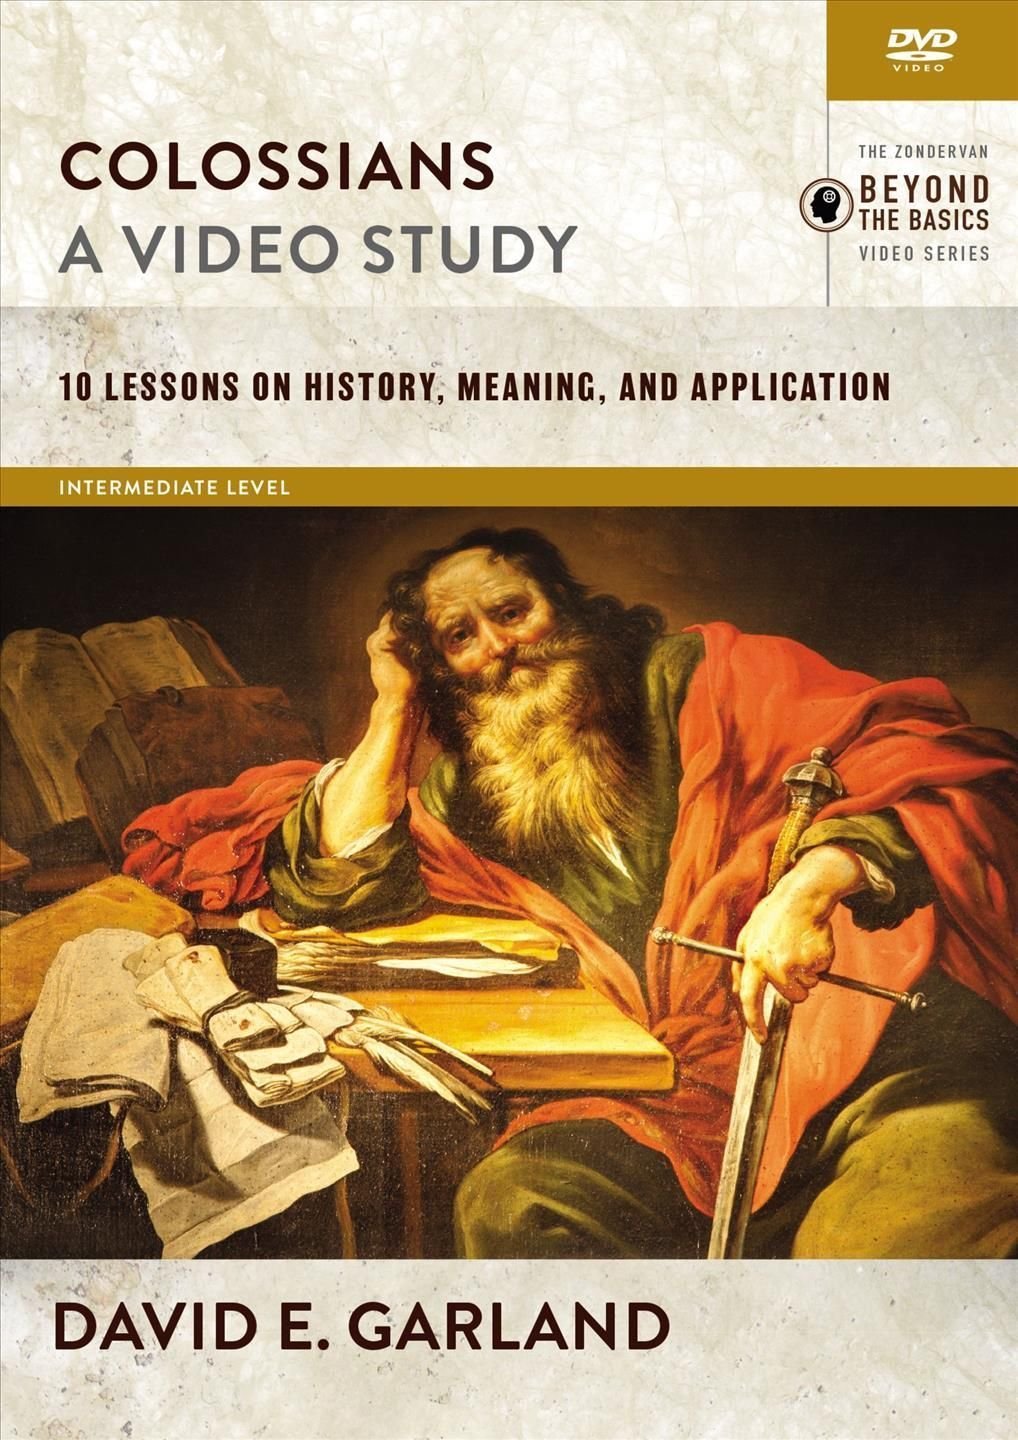 A　Free　Buy　Study　With　Colossians,　David　Video　Garland　Delivery　by　E.